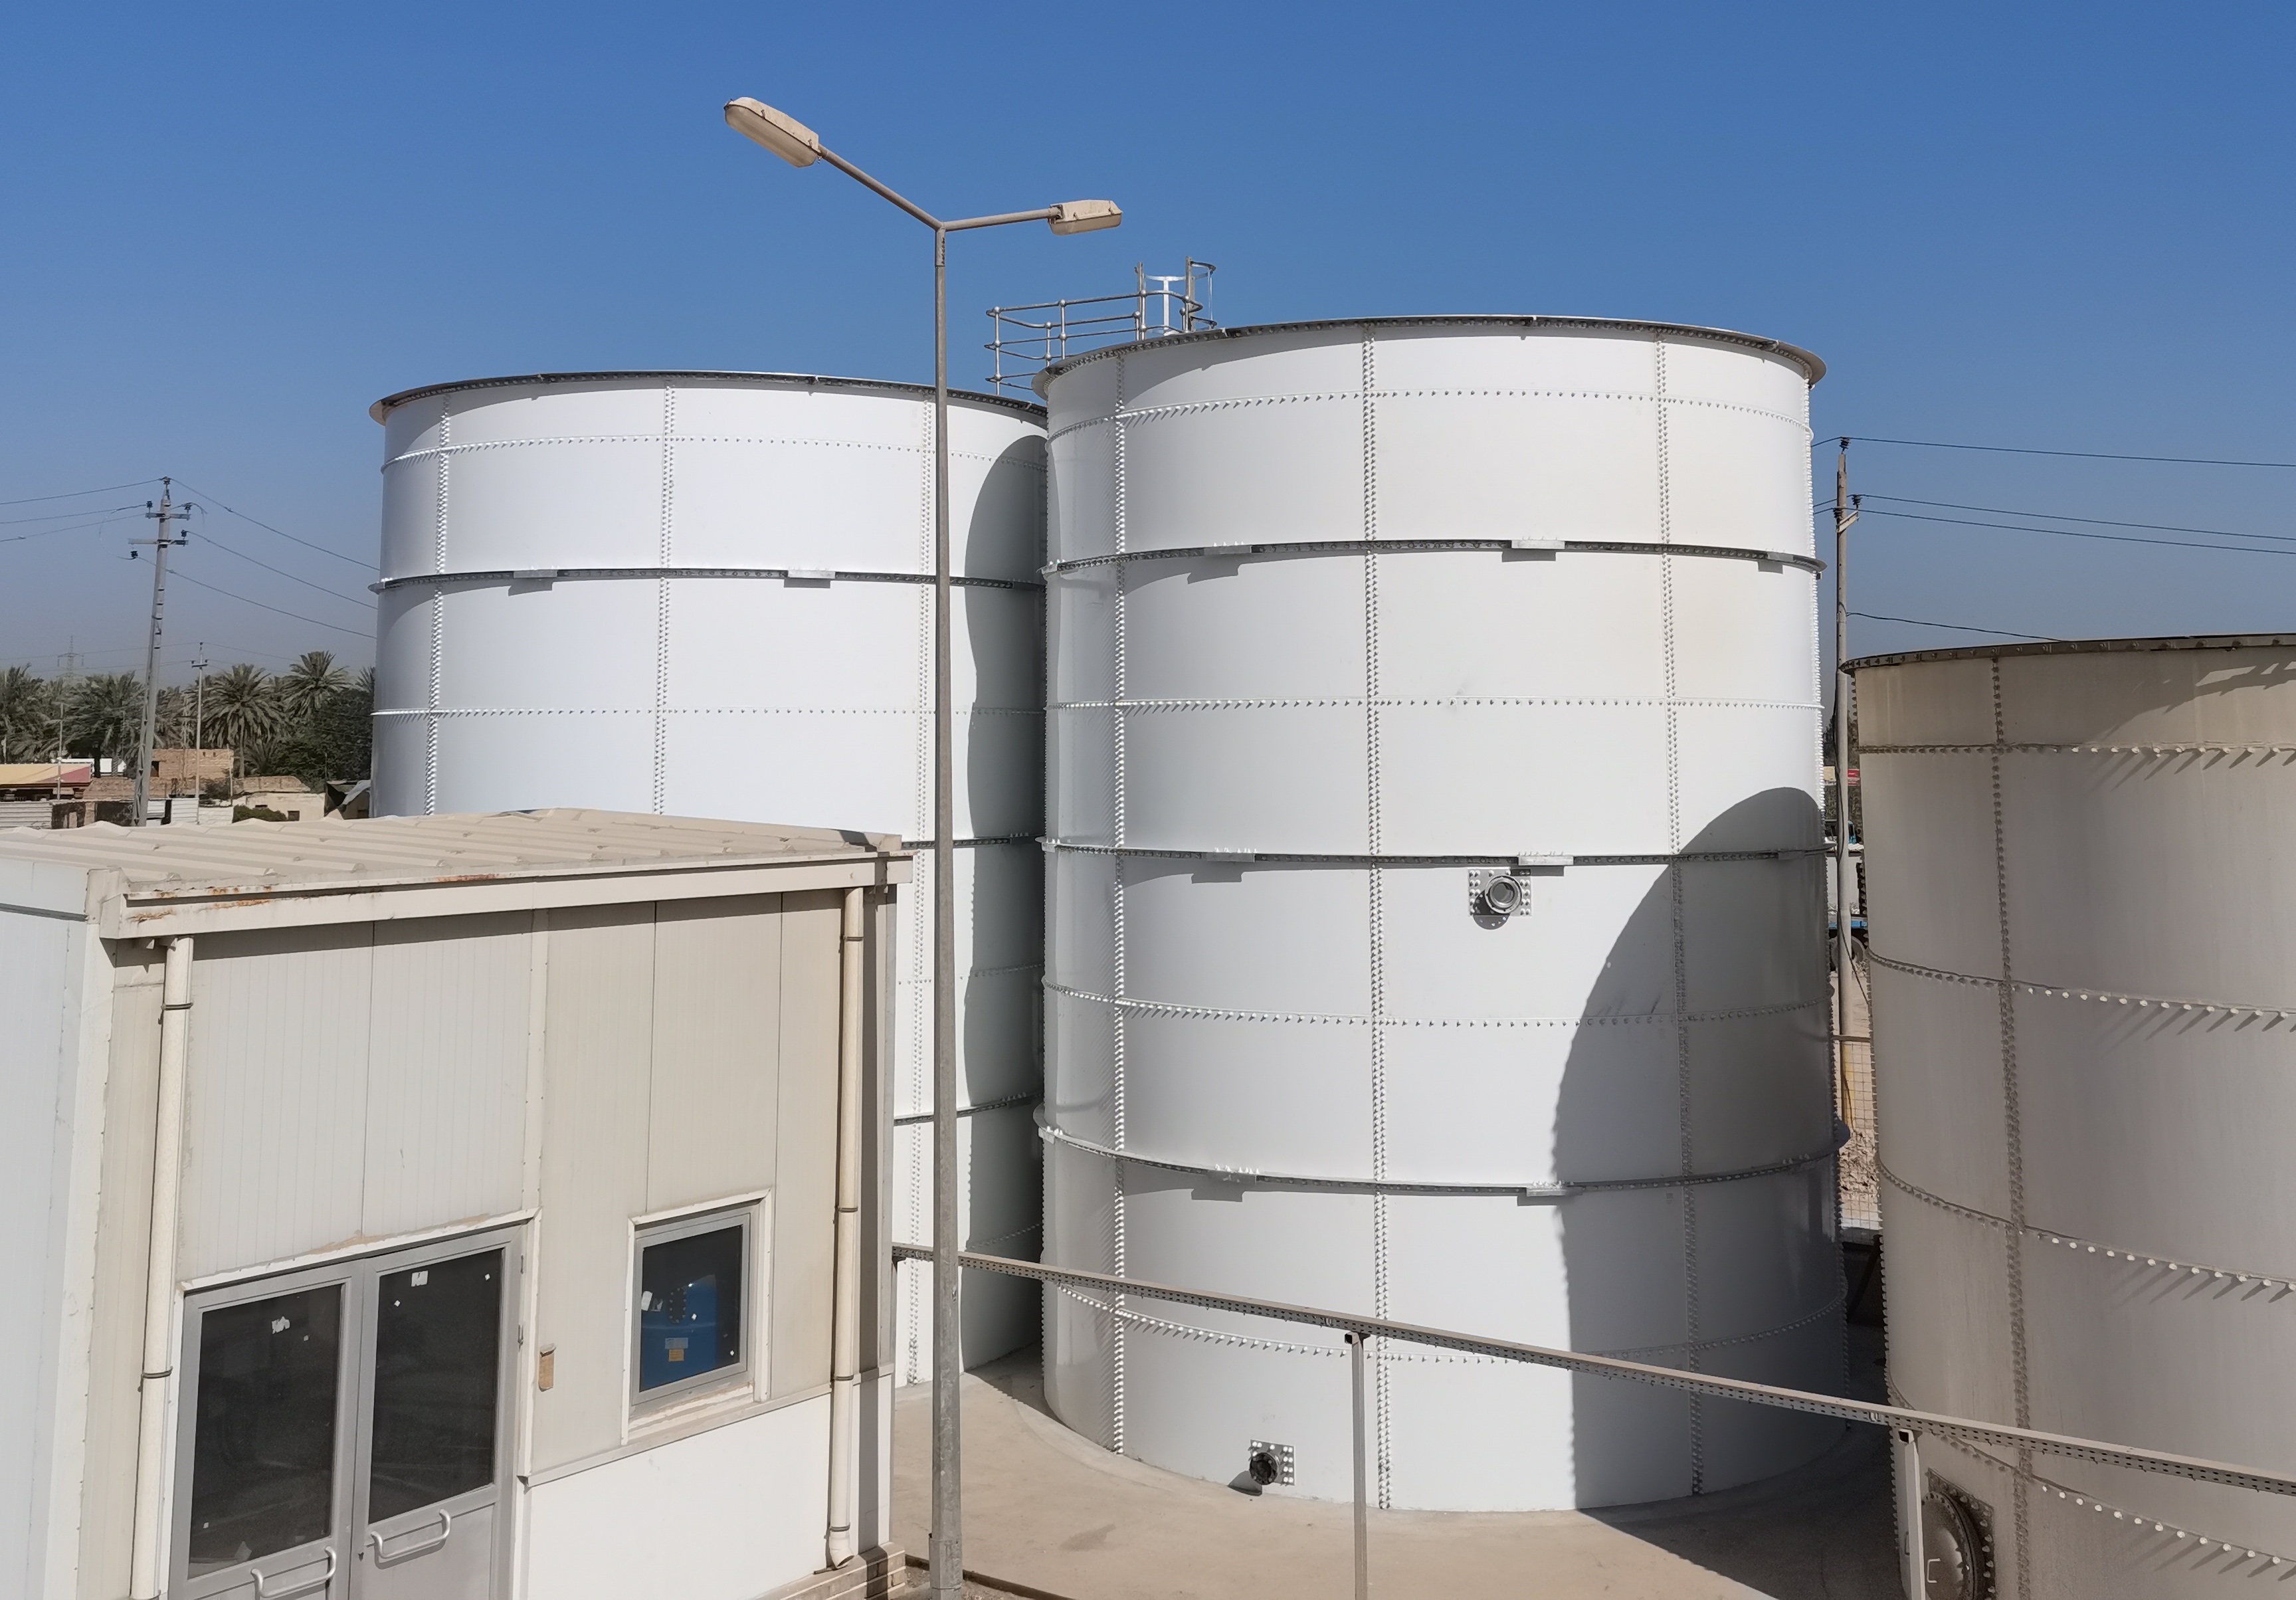 YHR two Glass-Fused-to-Steel Tank for drinking water was successfully installed in Iraq